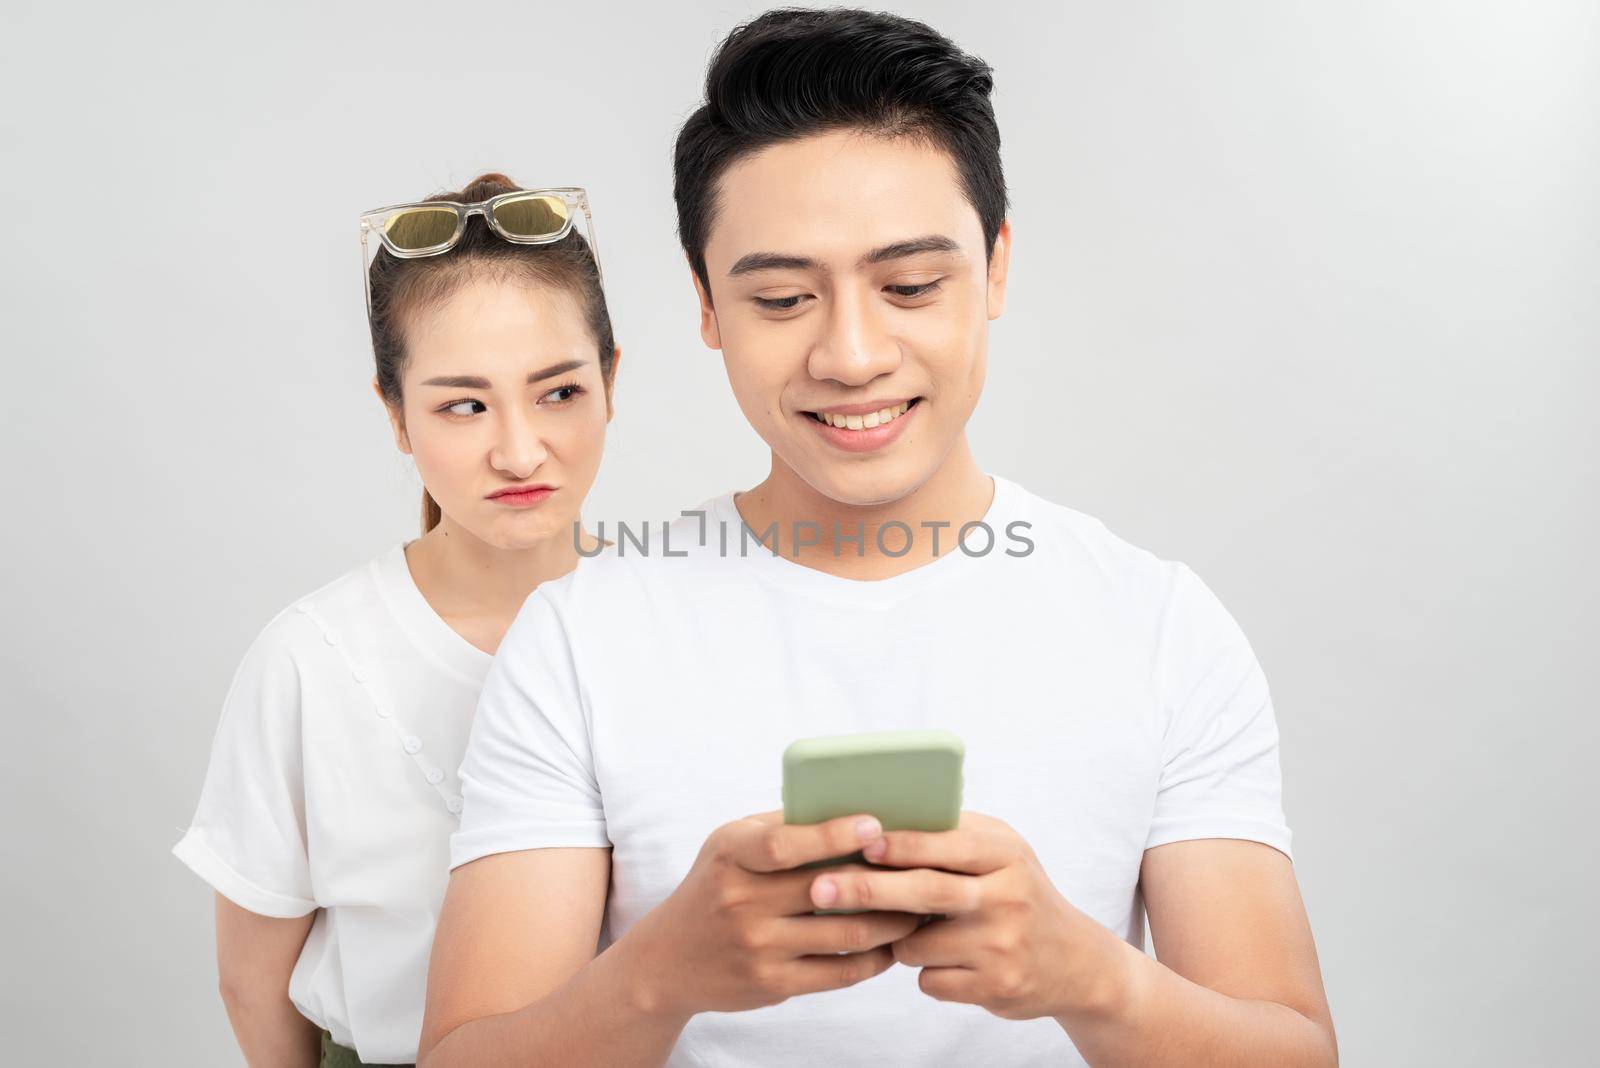 Cheater man dating online with a smart phone and girlfriend is spying on white background